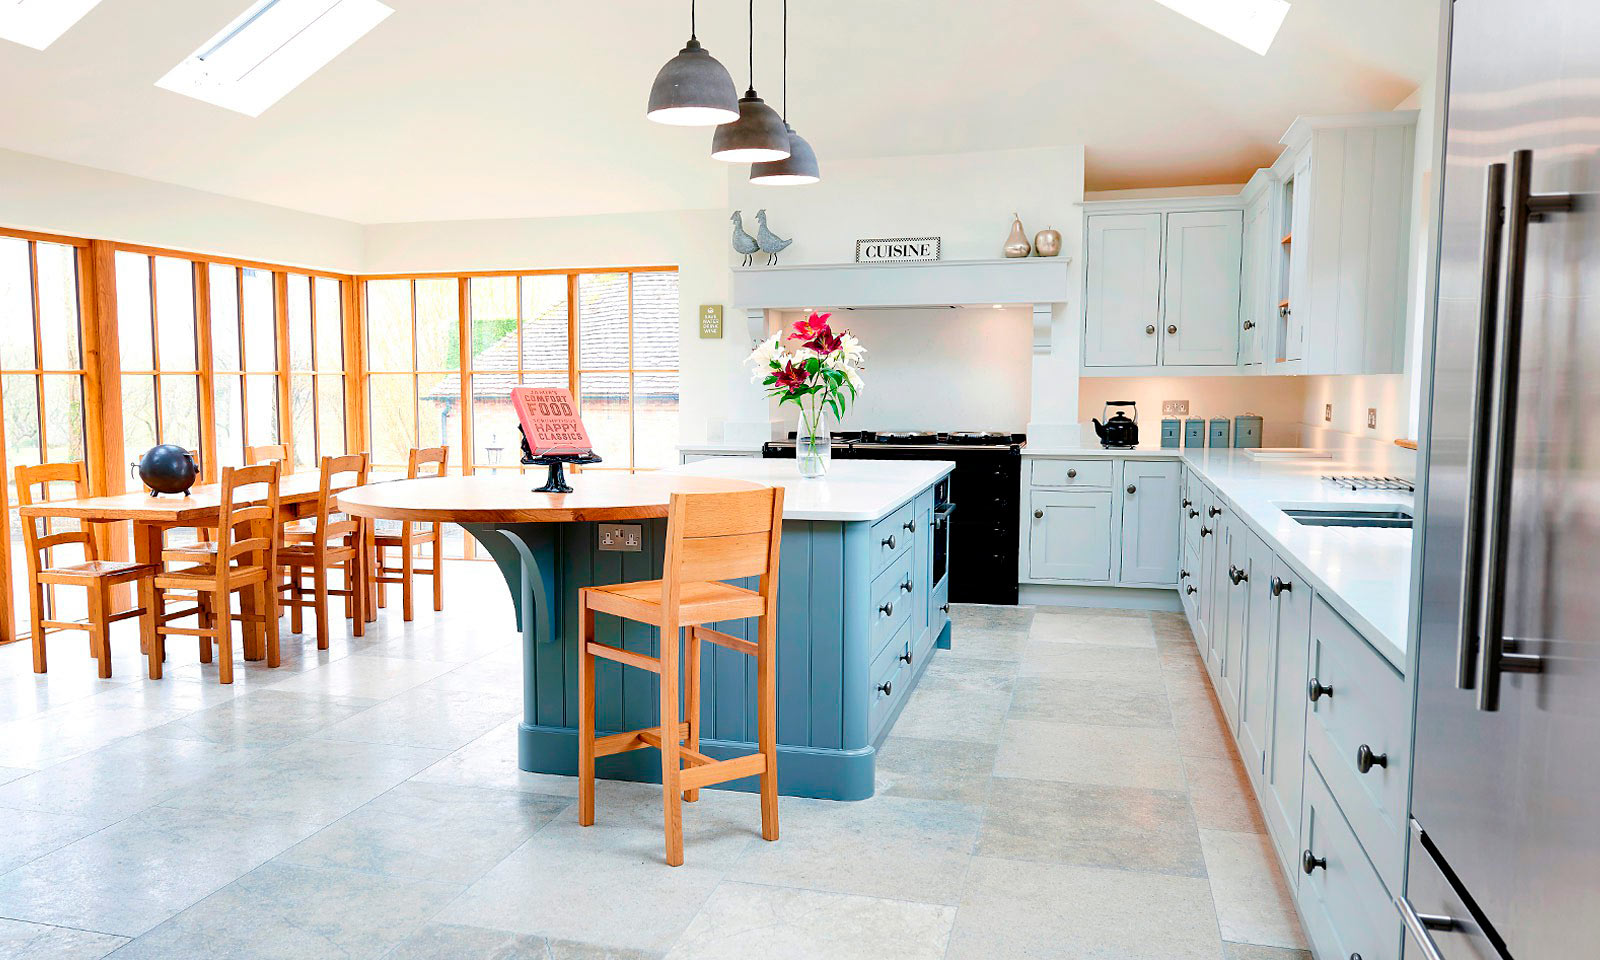 Biddenden. A classic handmade, hand-painted, Shaker style kitchen, installed in a large historic country villa. A bespoke hand-crafted kitchen manufactured by the skilled cabinet makers at Mounts Hill Woodcraft.